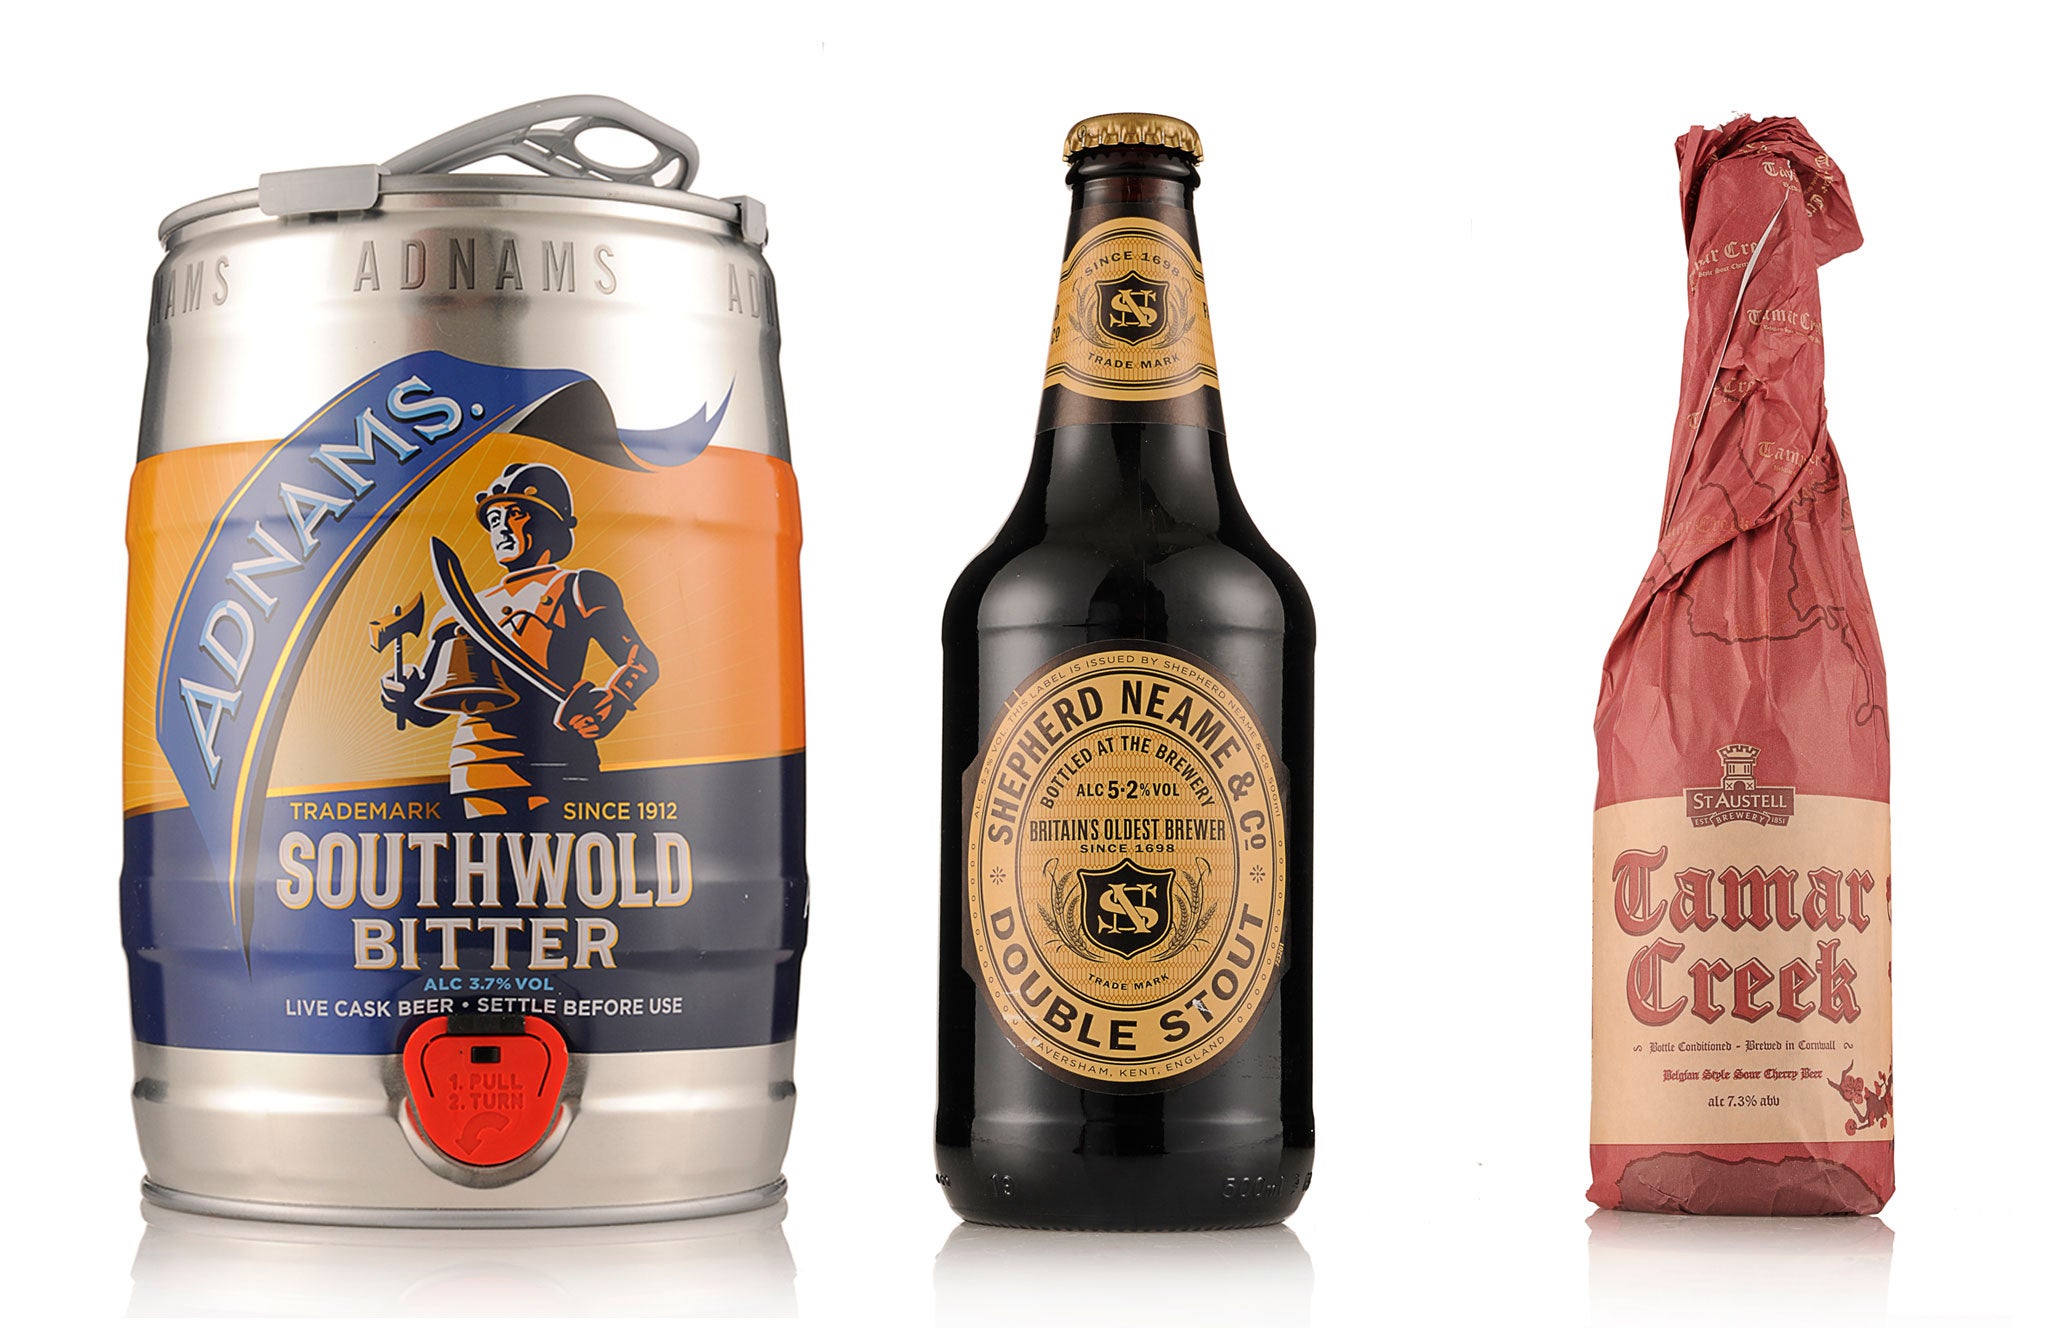 Tried and tested: Adnams Cask, Shepherd Neame Double Stout and St Austell Tamar Creek